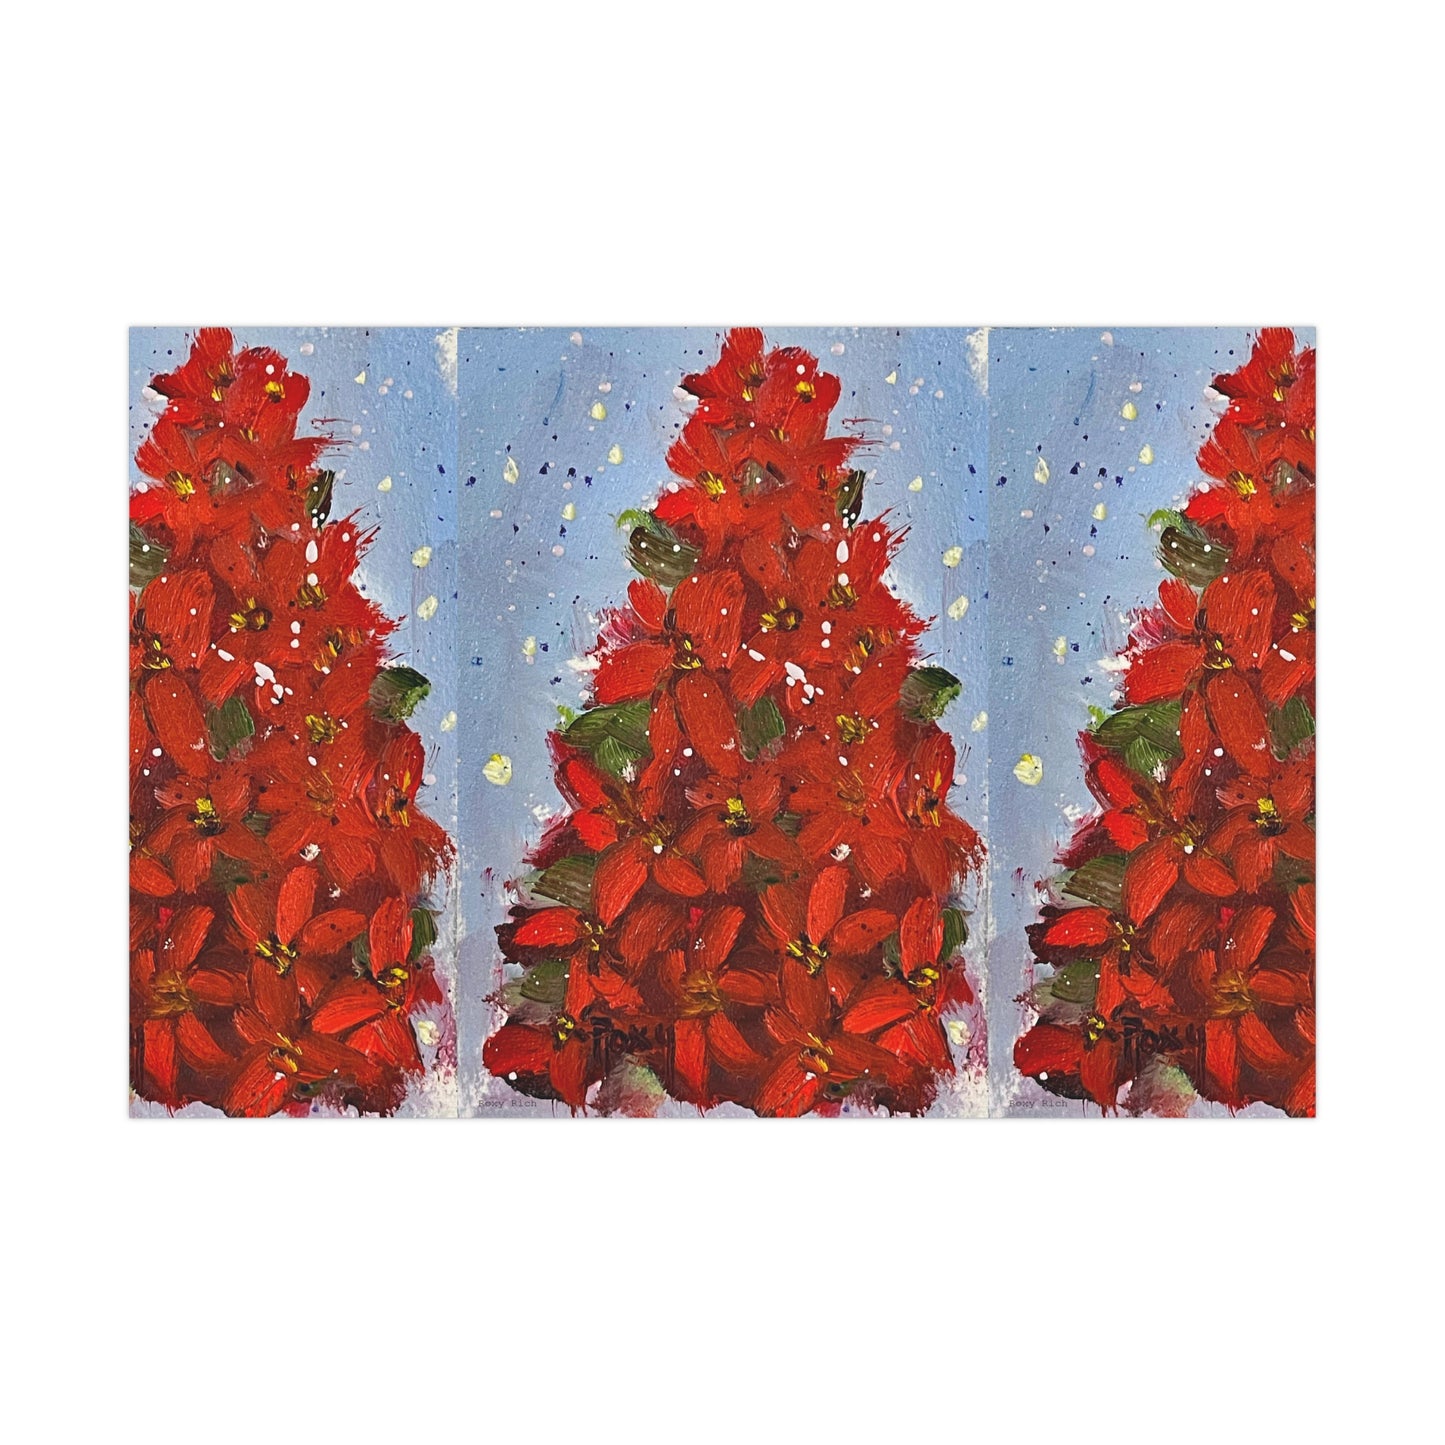 Poinsettias Tree (Large Print)Gift Wrapping Paper -Ships from America